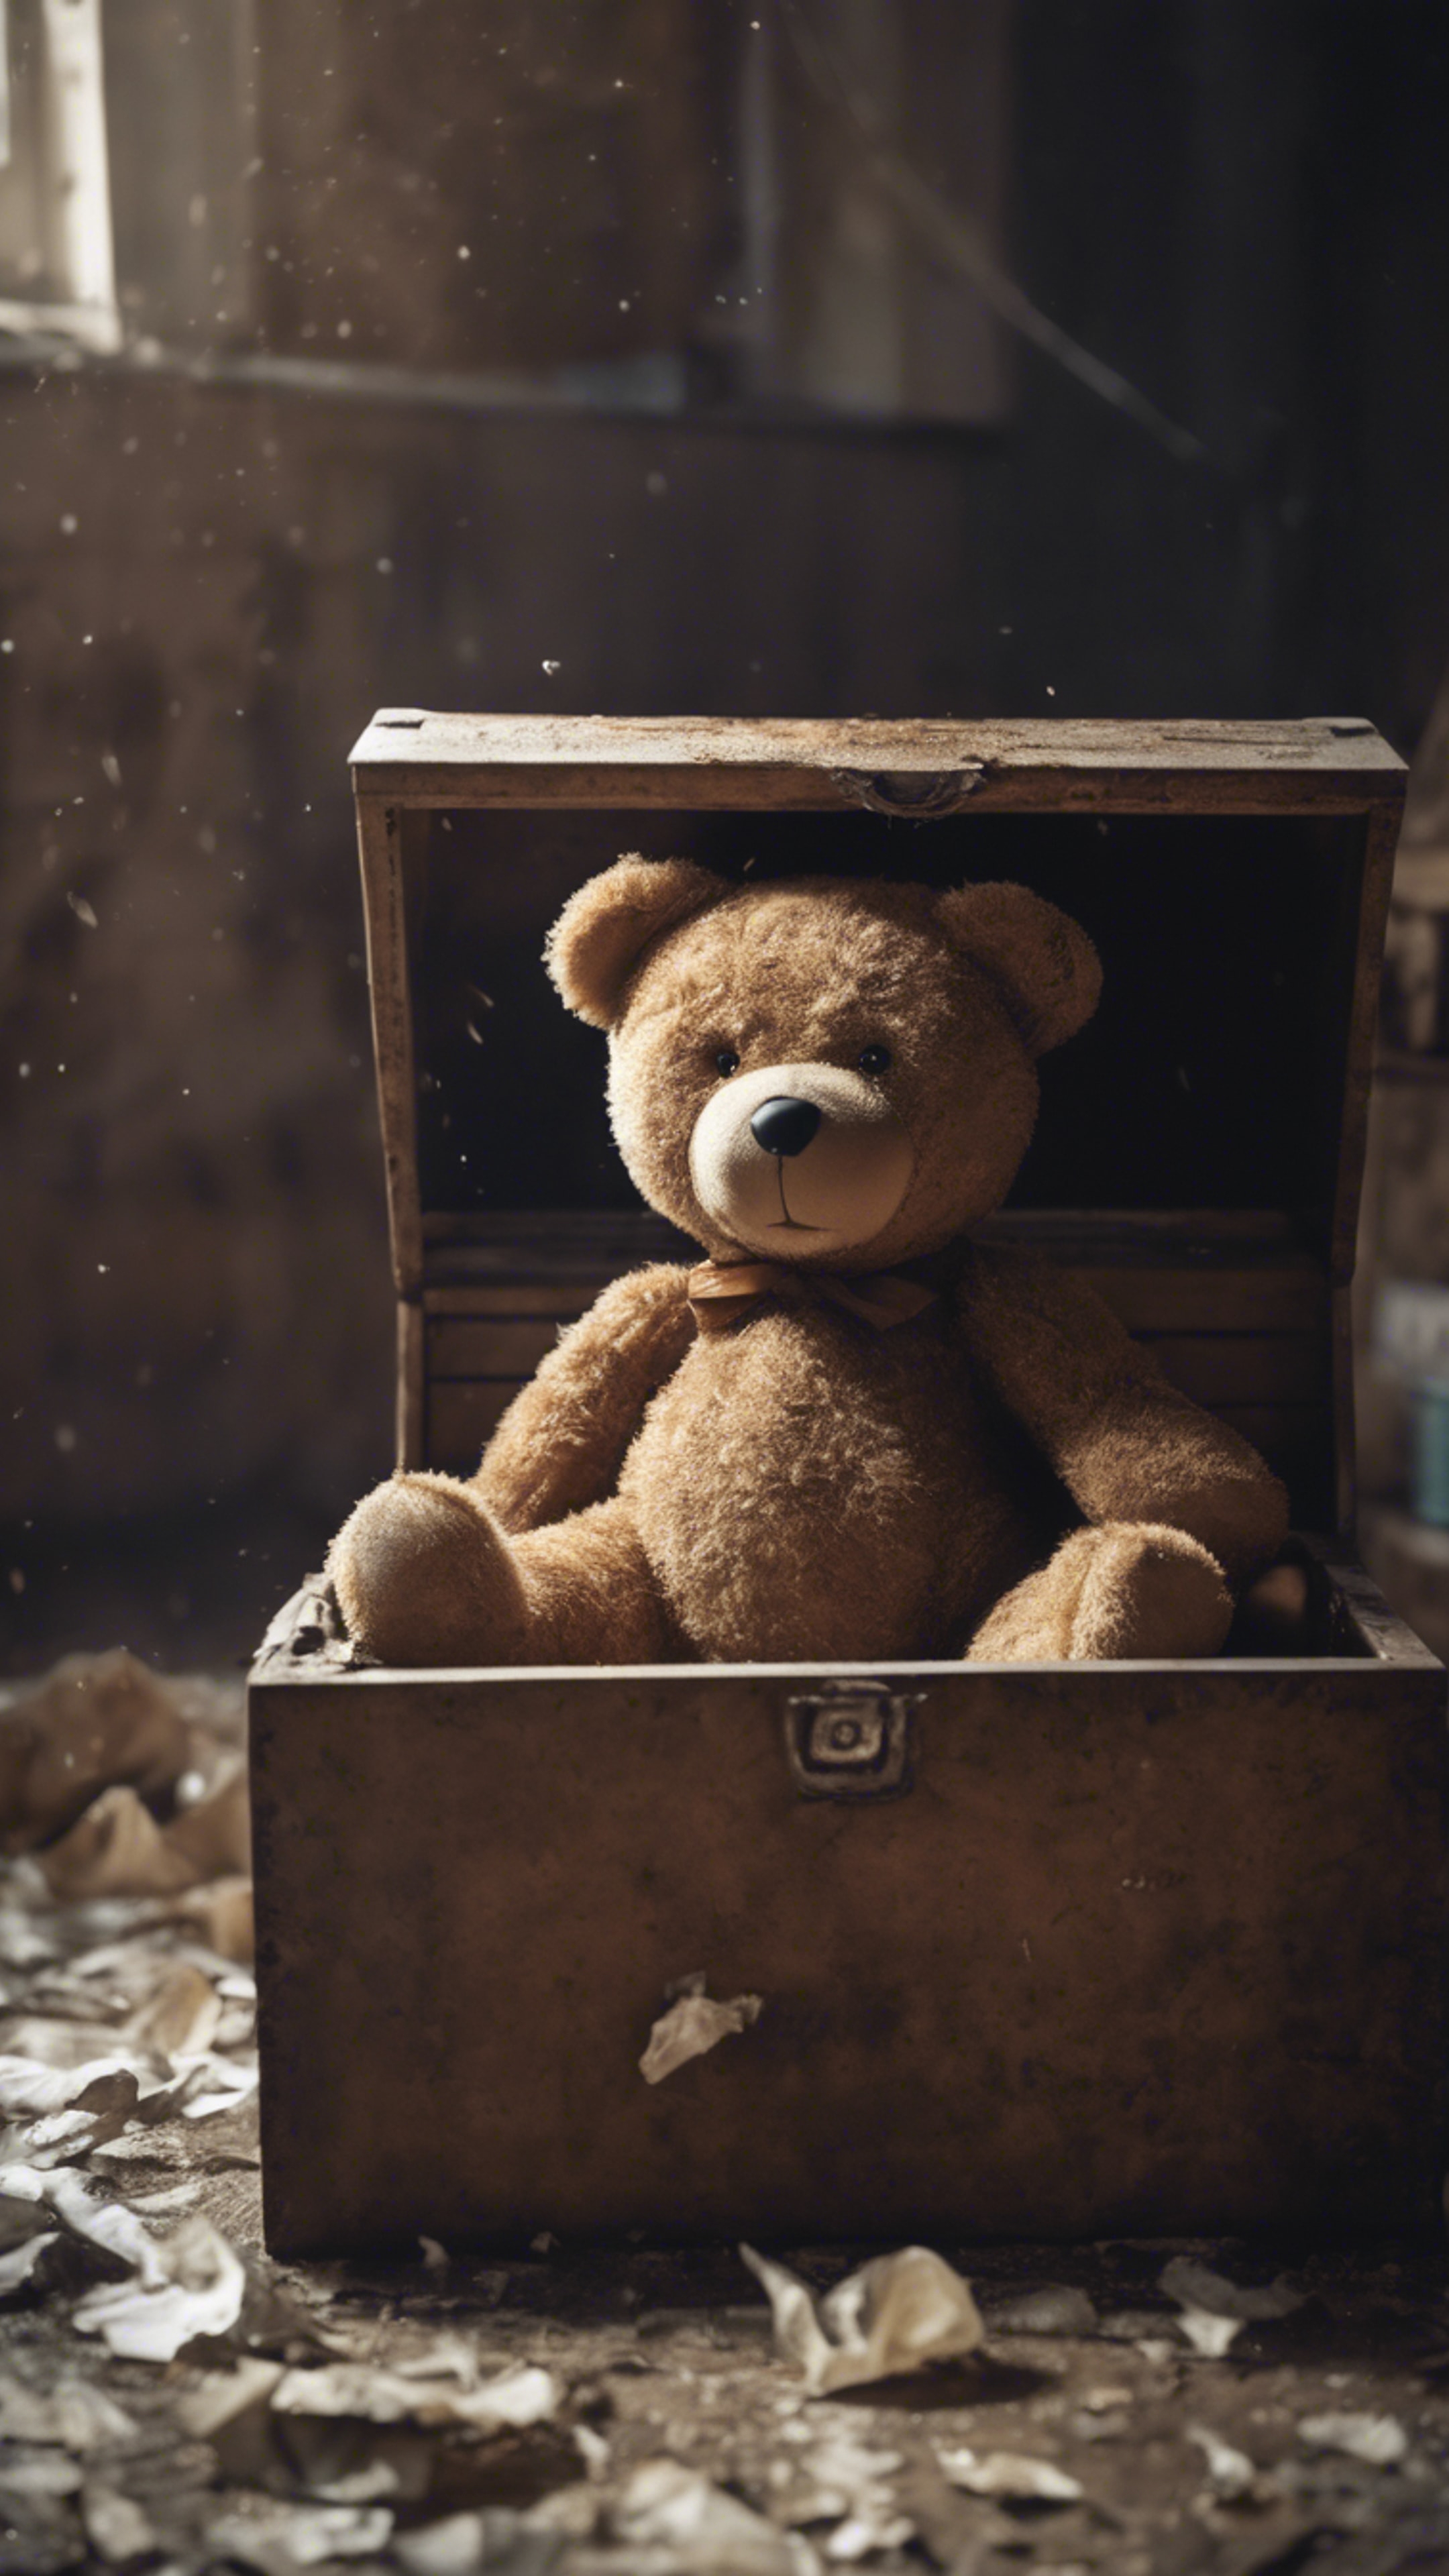 A haunted teddy bear lying in a forgotten toy box, a tear-stained face staring blankly at the ceiling. Papel de parede[ba9bf5e8e31a4c05a94a]